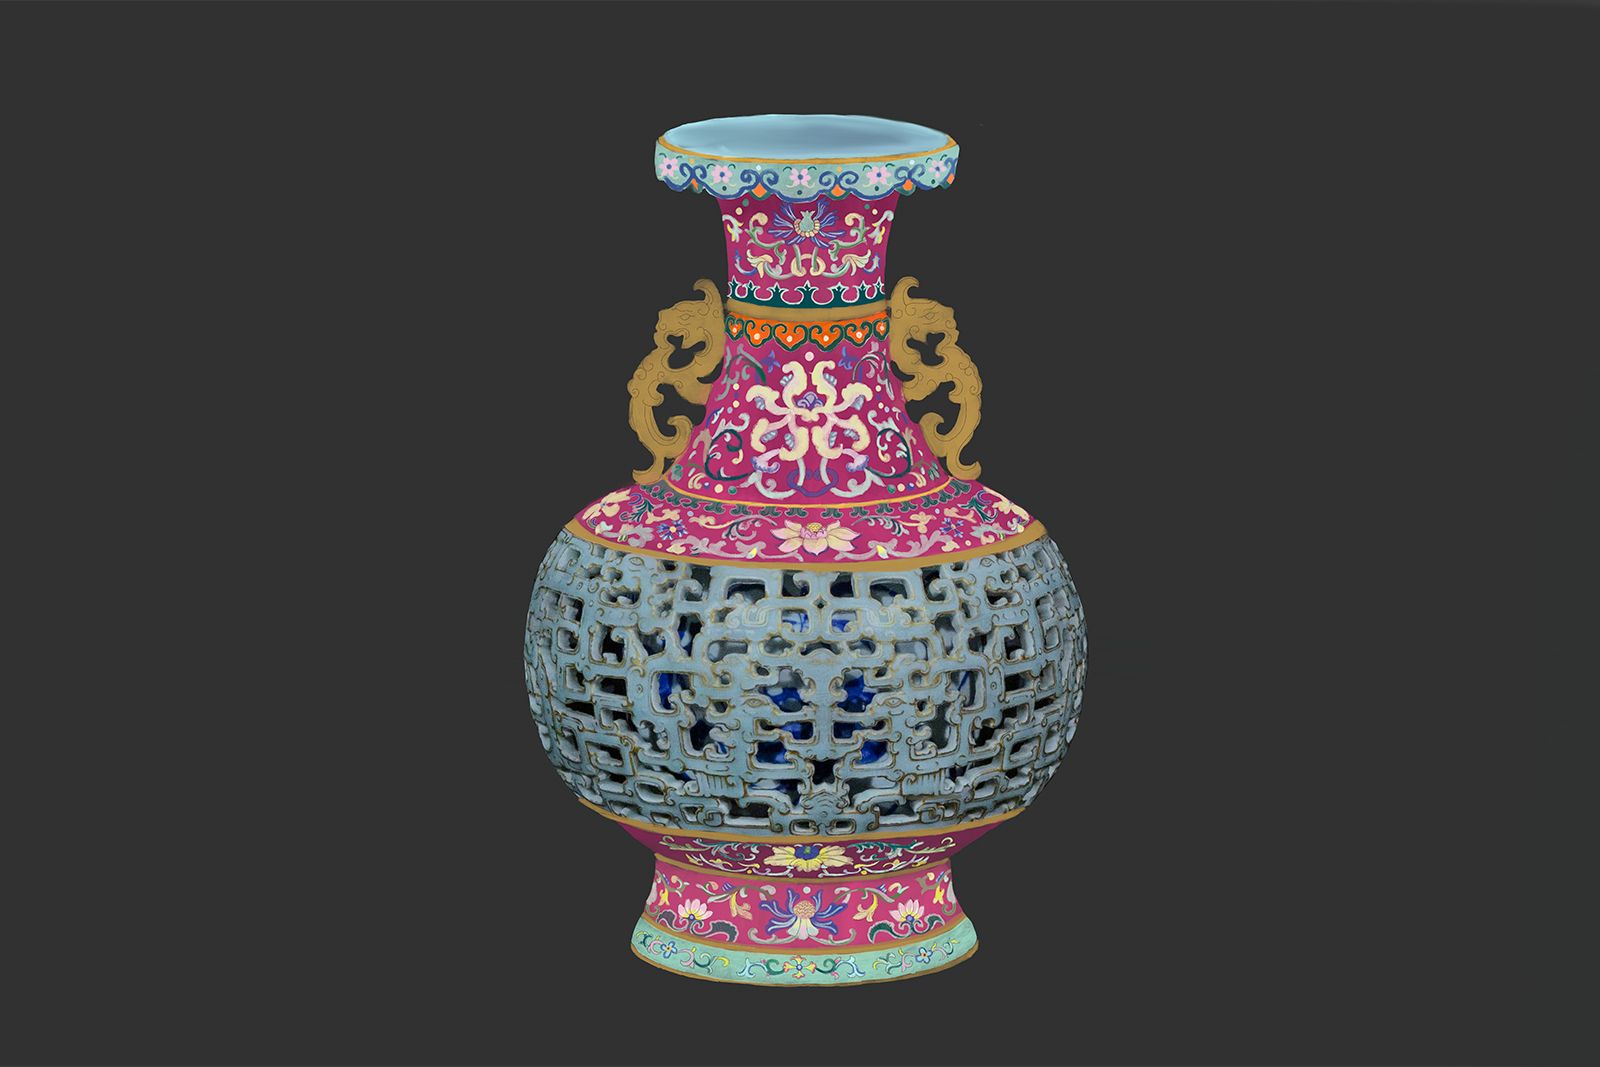 An 18th century Chinese porcelain vase that was once housed at the Qianqing Palace (Palace of Heavenly Purity) in the Forbidden City, which inspired the new Heavenly Purity line by Simone Jewels